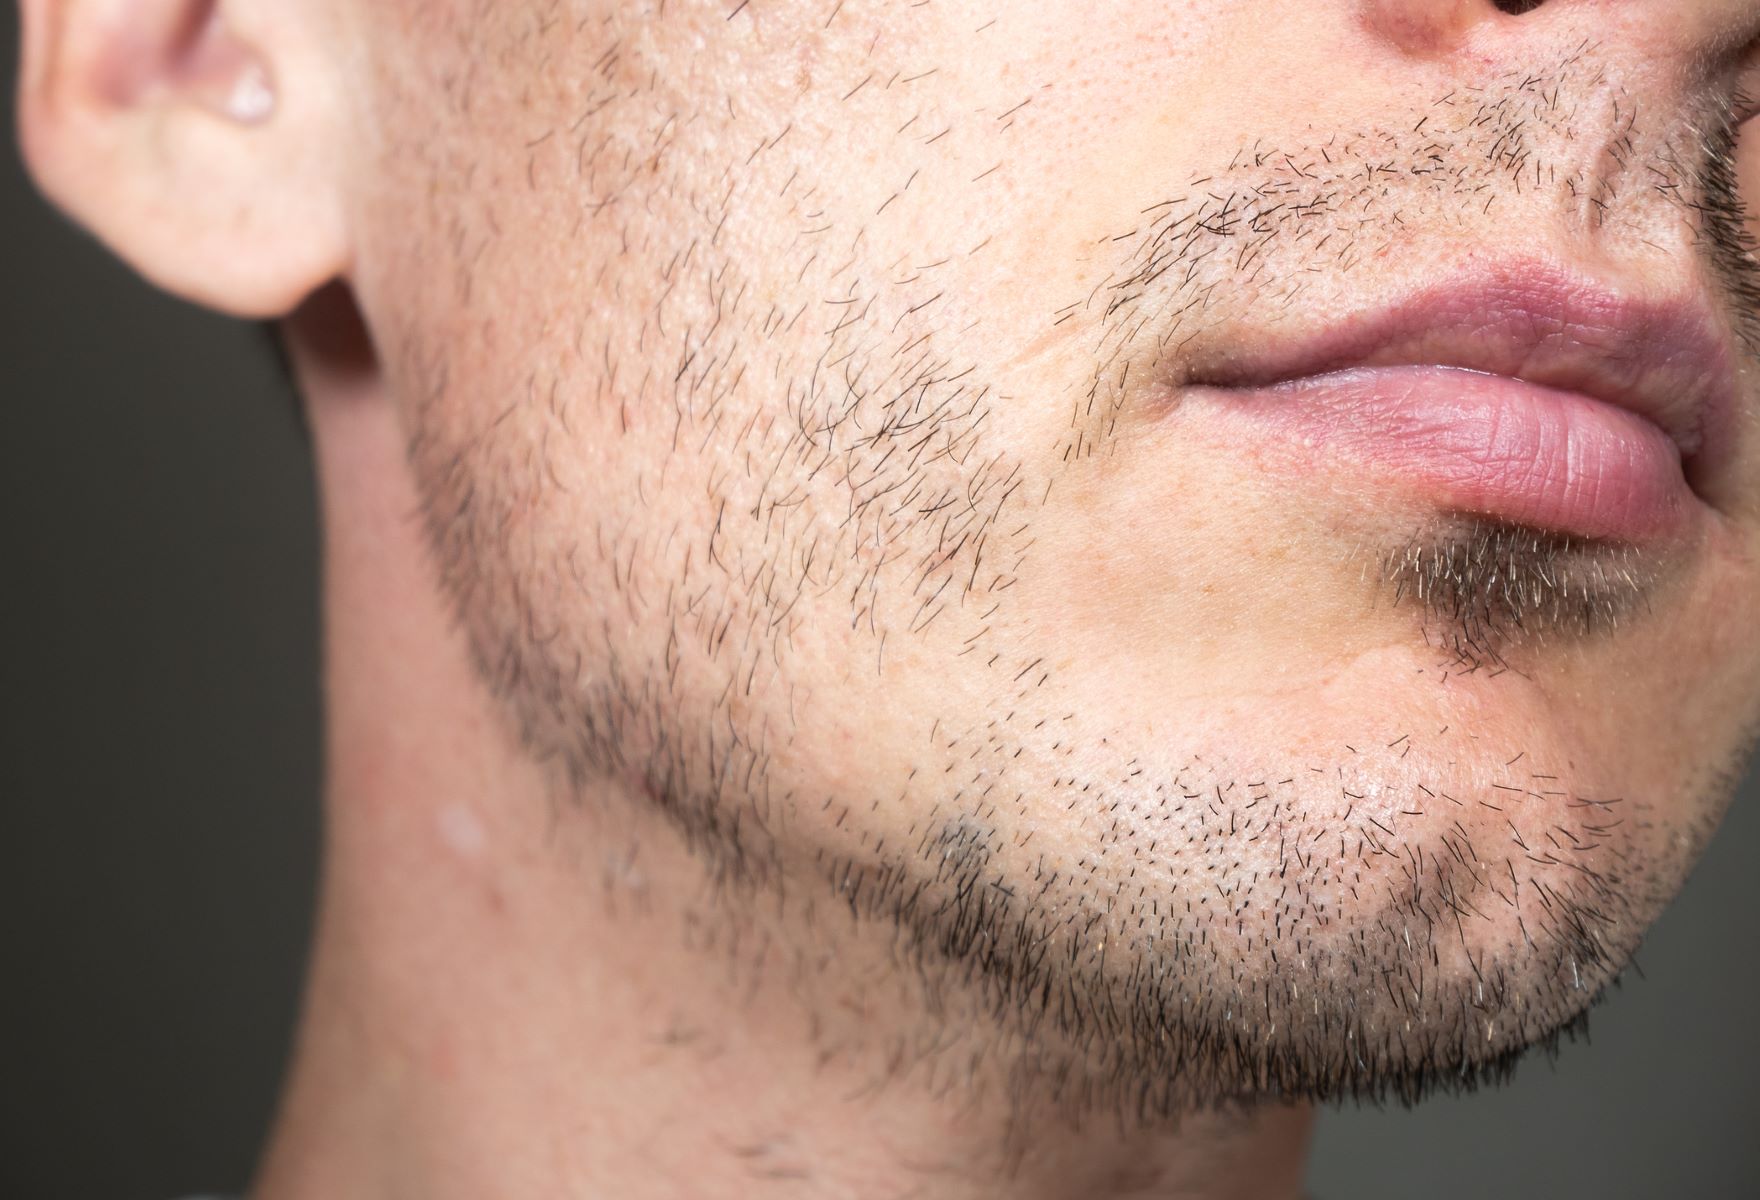 Beard thinning due to thyroid dysfunction